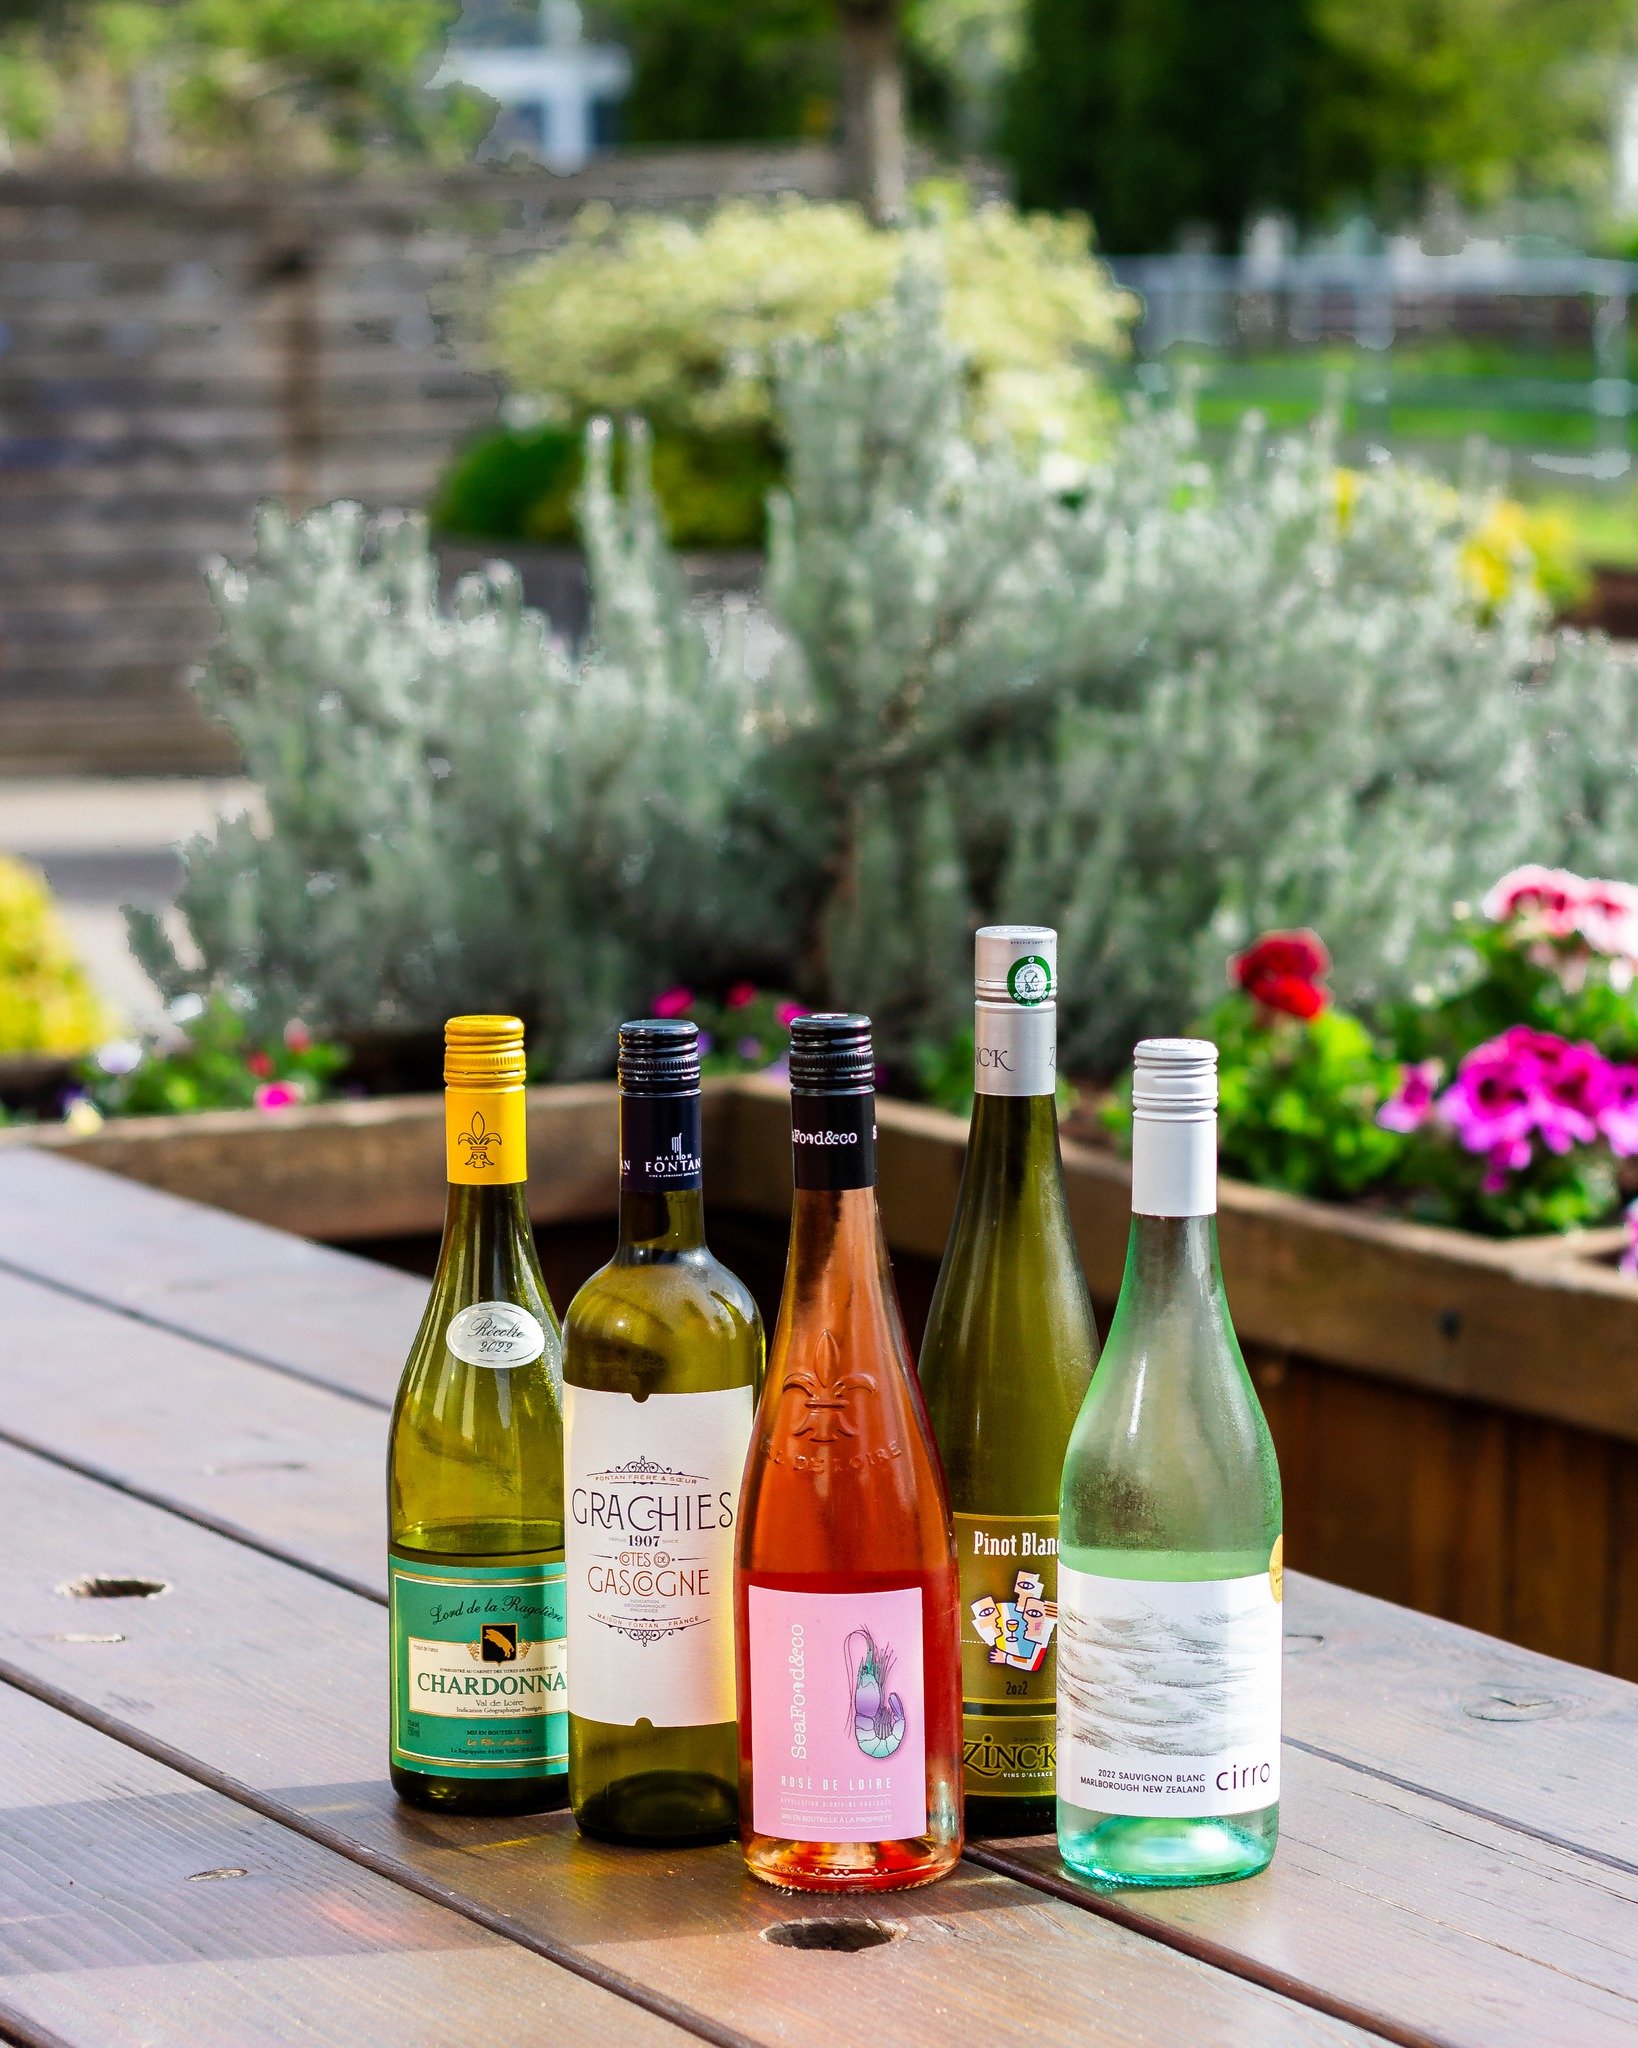 it's the season for crisp wines on the patio 🌸 (despite this week of grey clouds) and while our patio is not fully ready, we're happy to seat you there weather permitting

watch this space transform over the next month as we prepare for a beautiful 